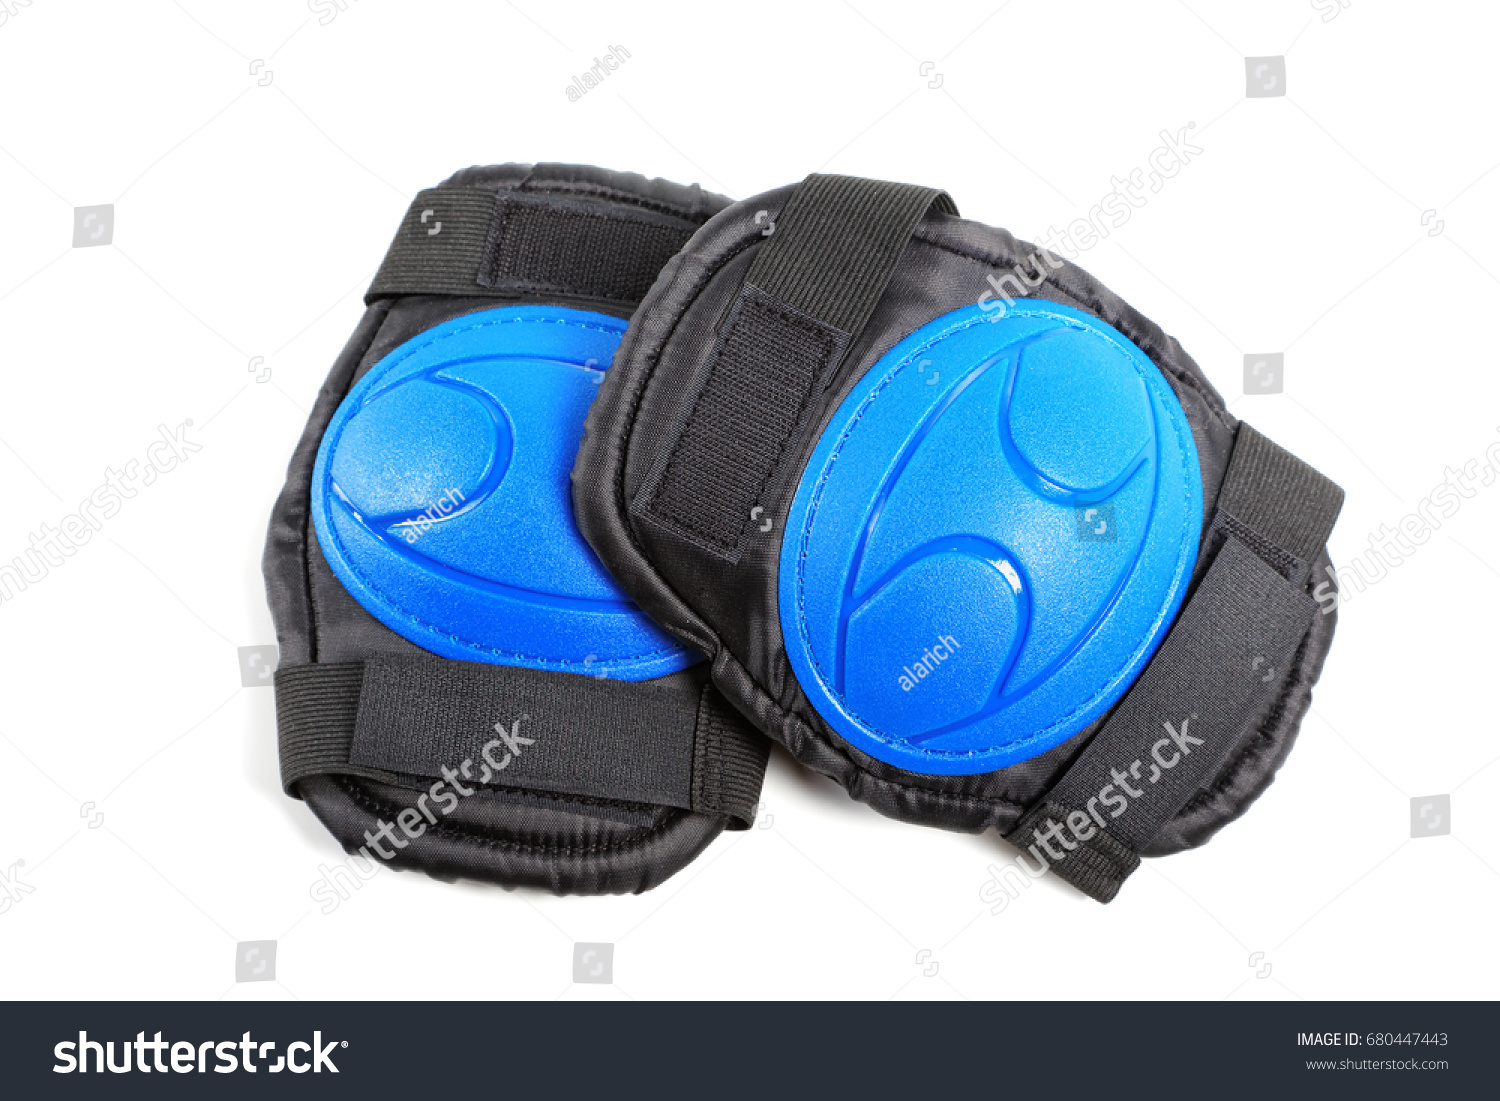 Knee pads and elbow pads isolated on white background #680447443